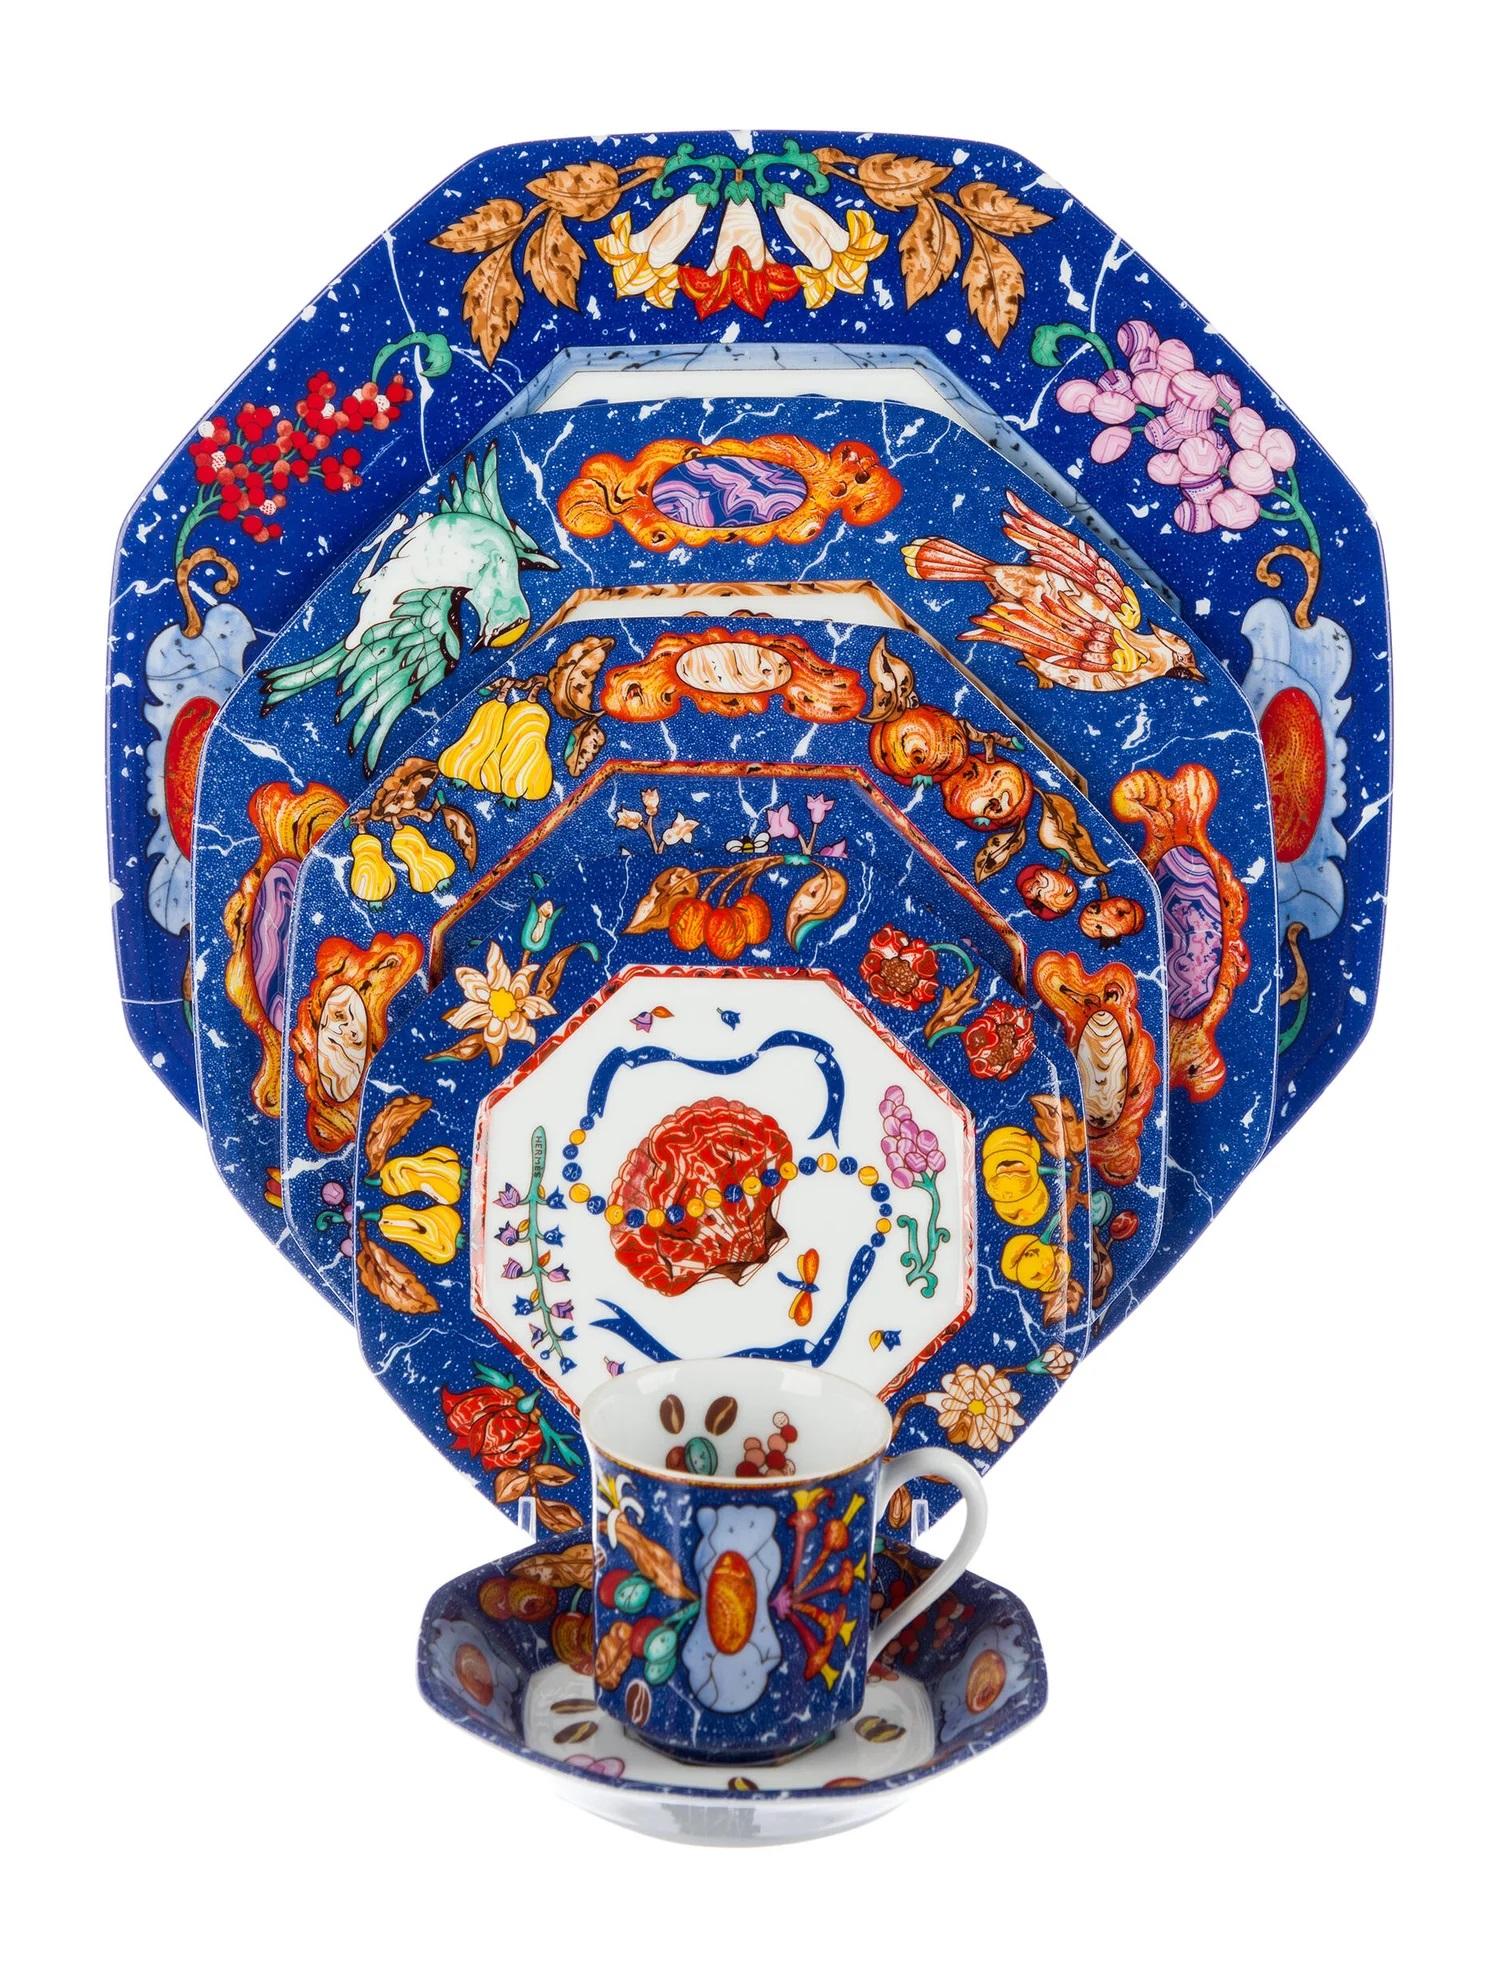 A 25 piece dinnerware set in the Marqueterie de Pierres d'Orient et d'Occident pattern by Hermès.

Features a white, blue and multicolor design with fruit and floral motif throughout, paneled walls at exteriors and brand stamp at undersides.